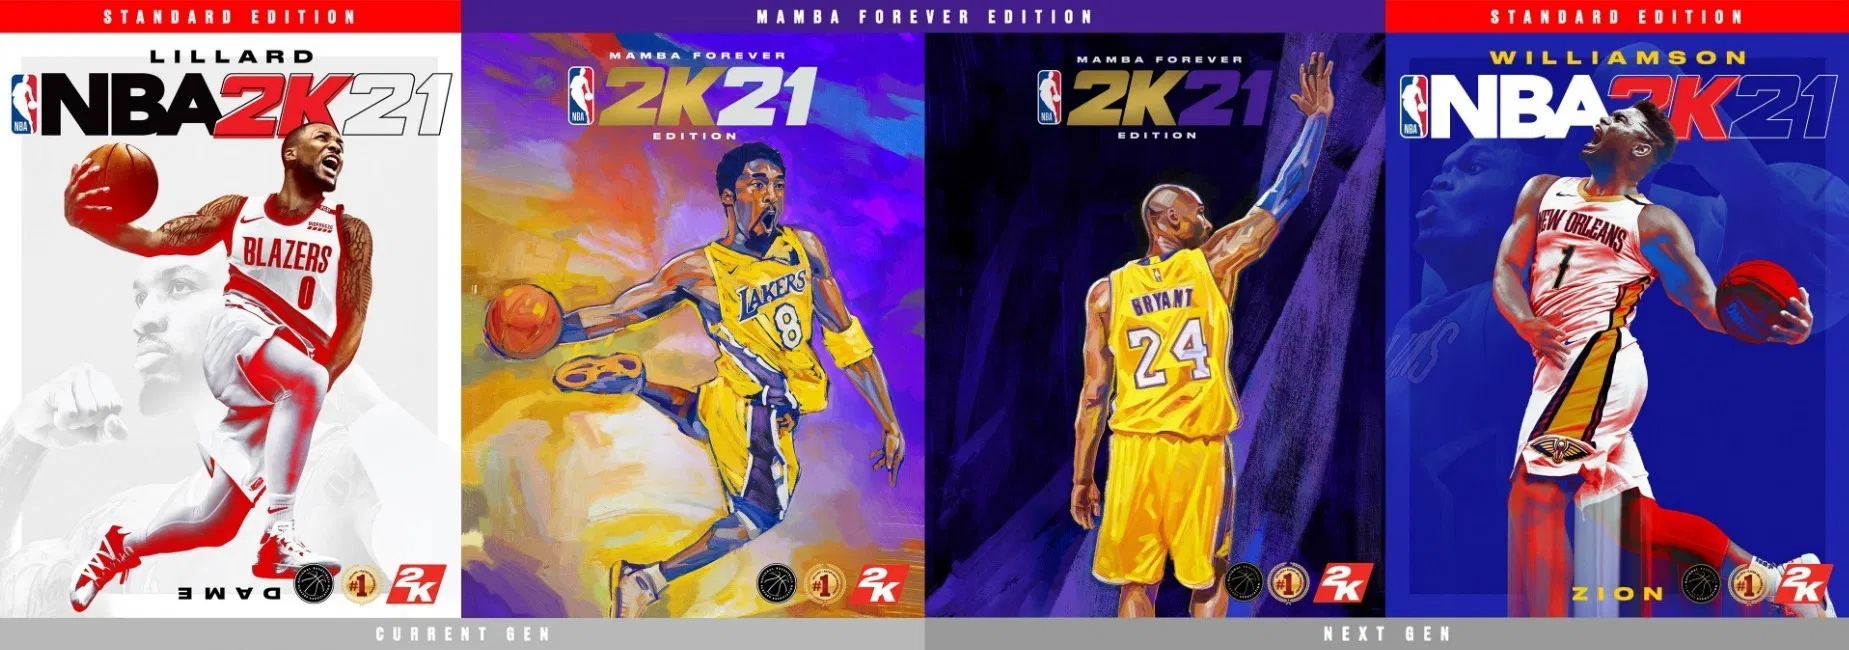 NBA 2K21 Release Date, Cover Athlete, Price and More